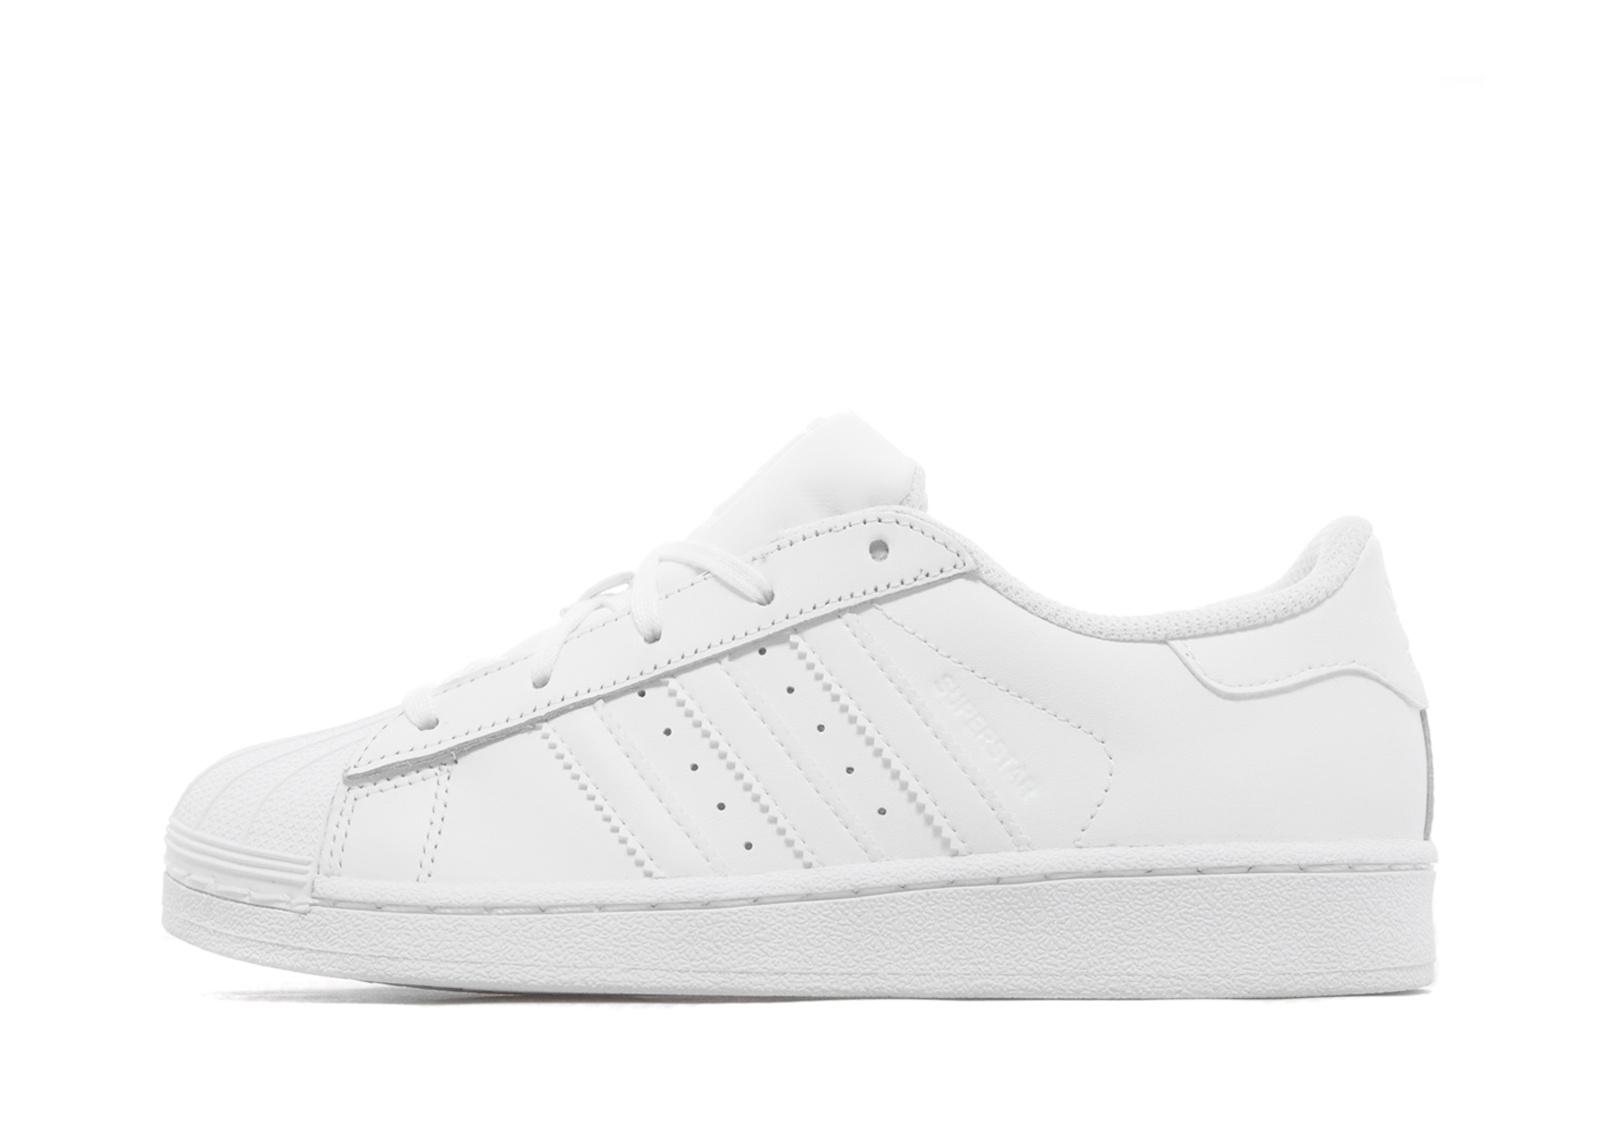 Super Comparer adidas superstar taille 35 lacets, Grise, Blanche 